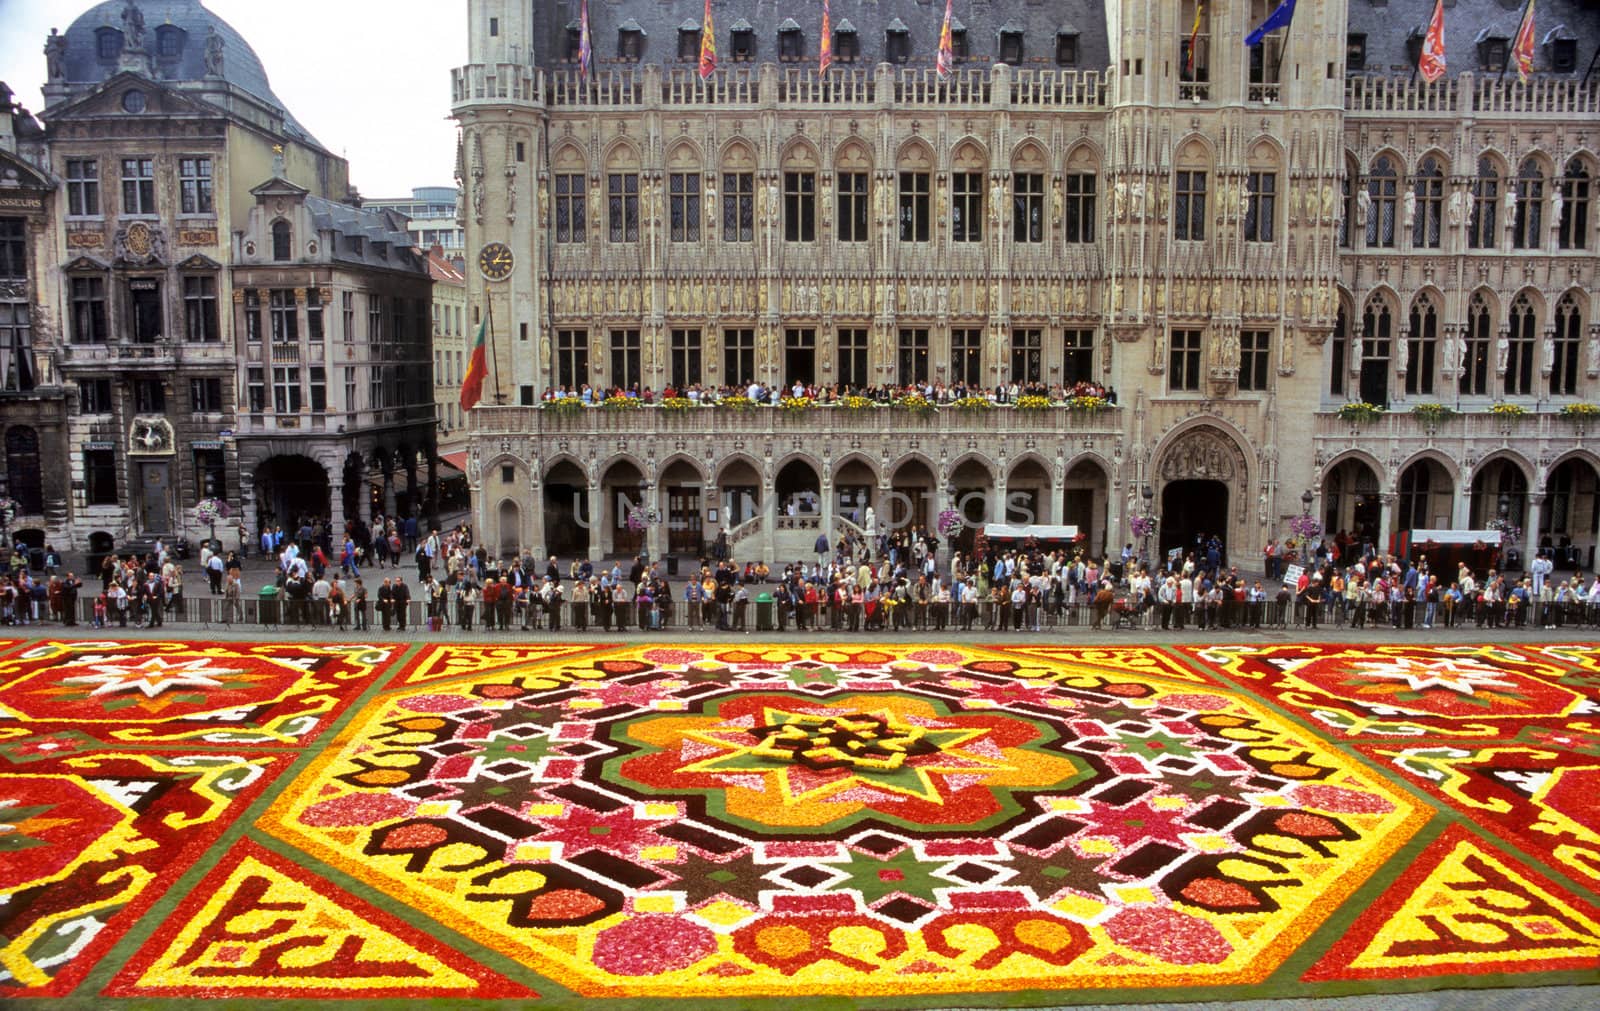 The Brussels flower carpet is designed of Begonias every second year in the central square - Grand Place. This year's theme was the kaledoscope.